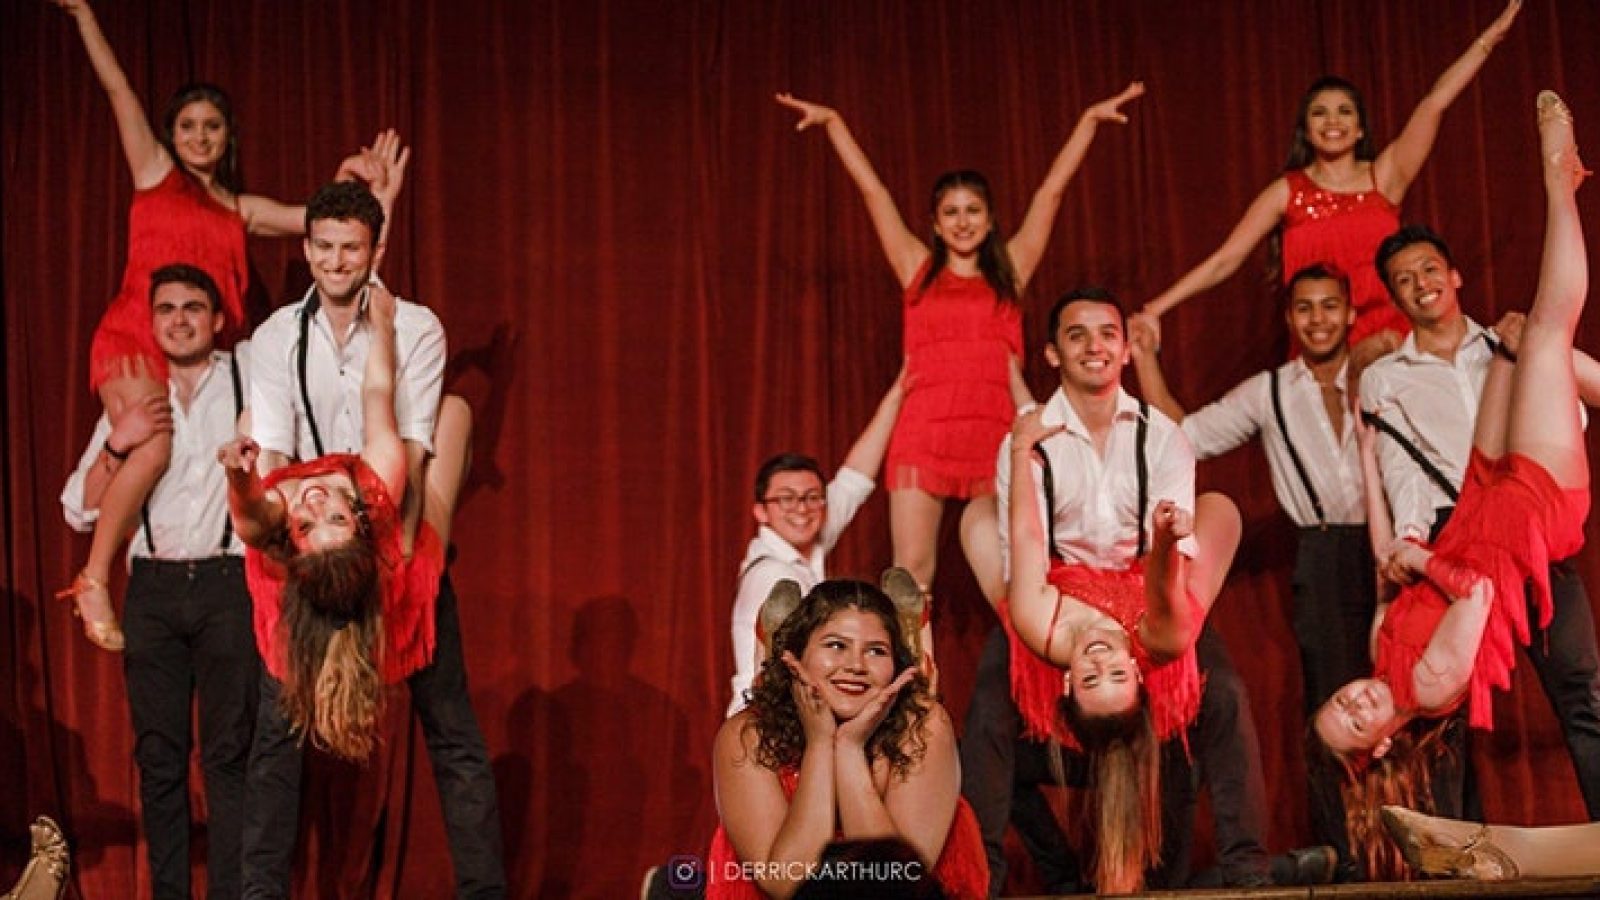 A Group of male and female dancers on stage